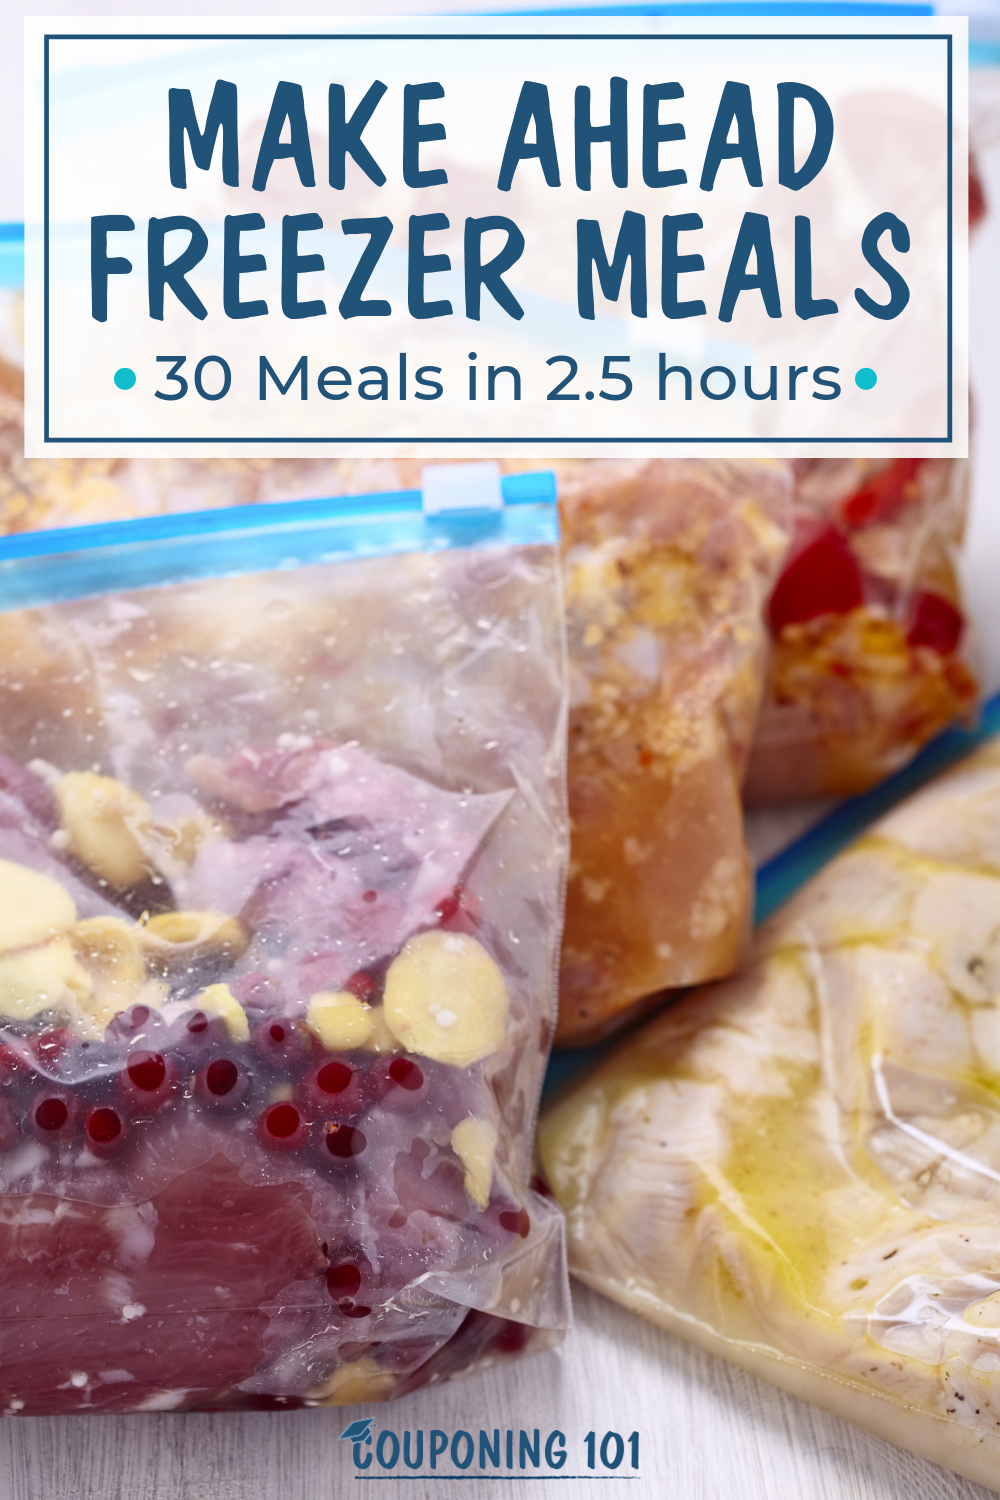 My Freezer Cooking Experience: 30 Meals in 2.5 Hours! | Couponing 101